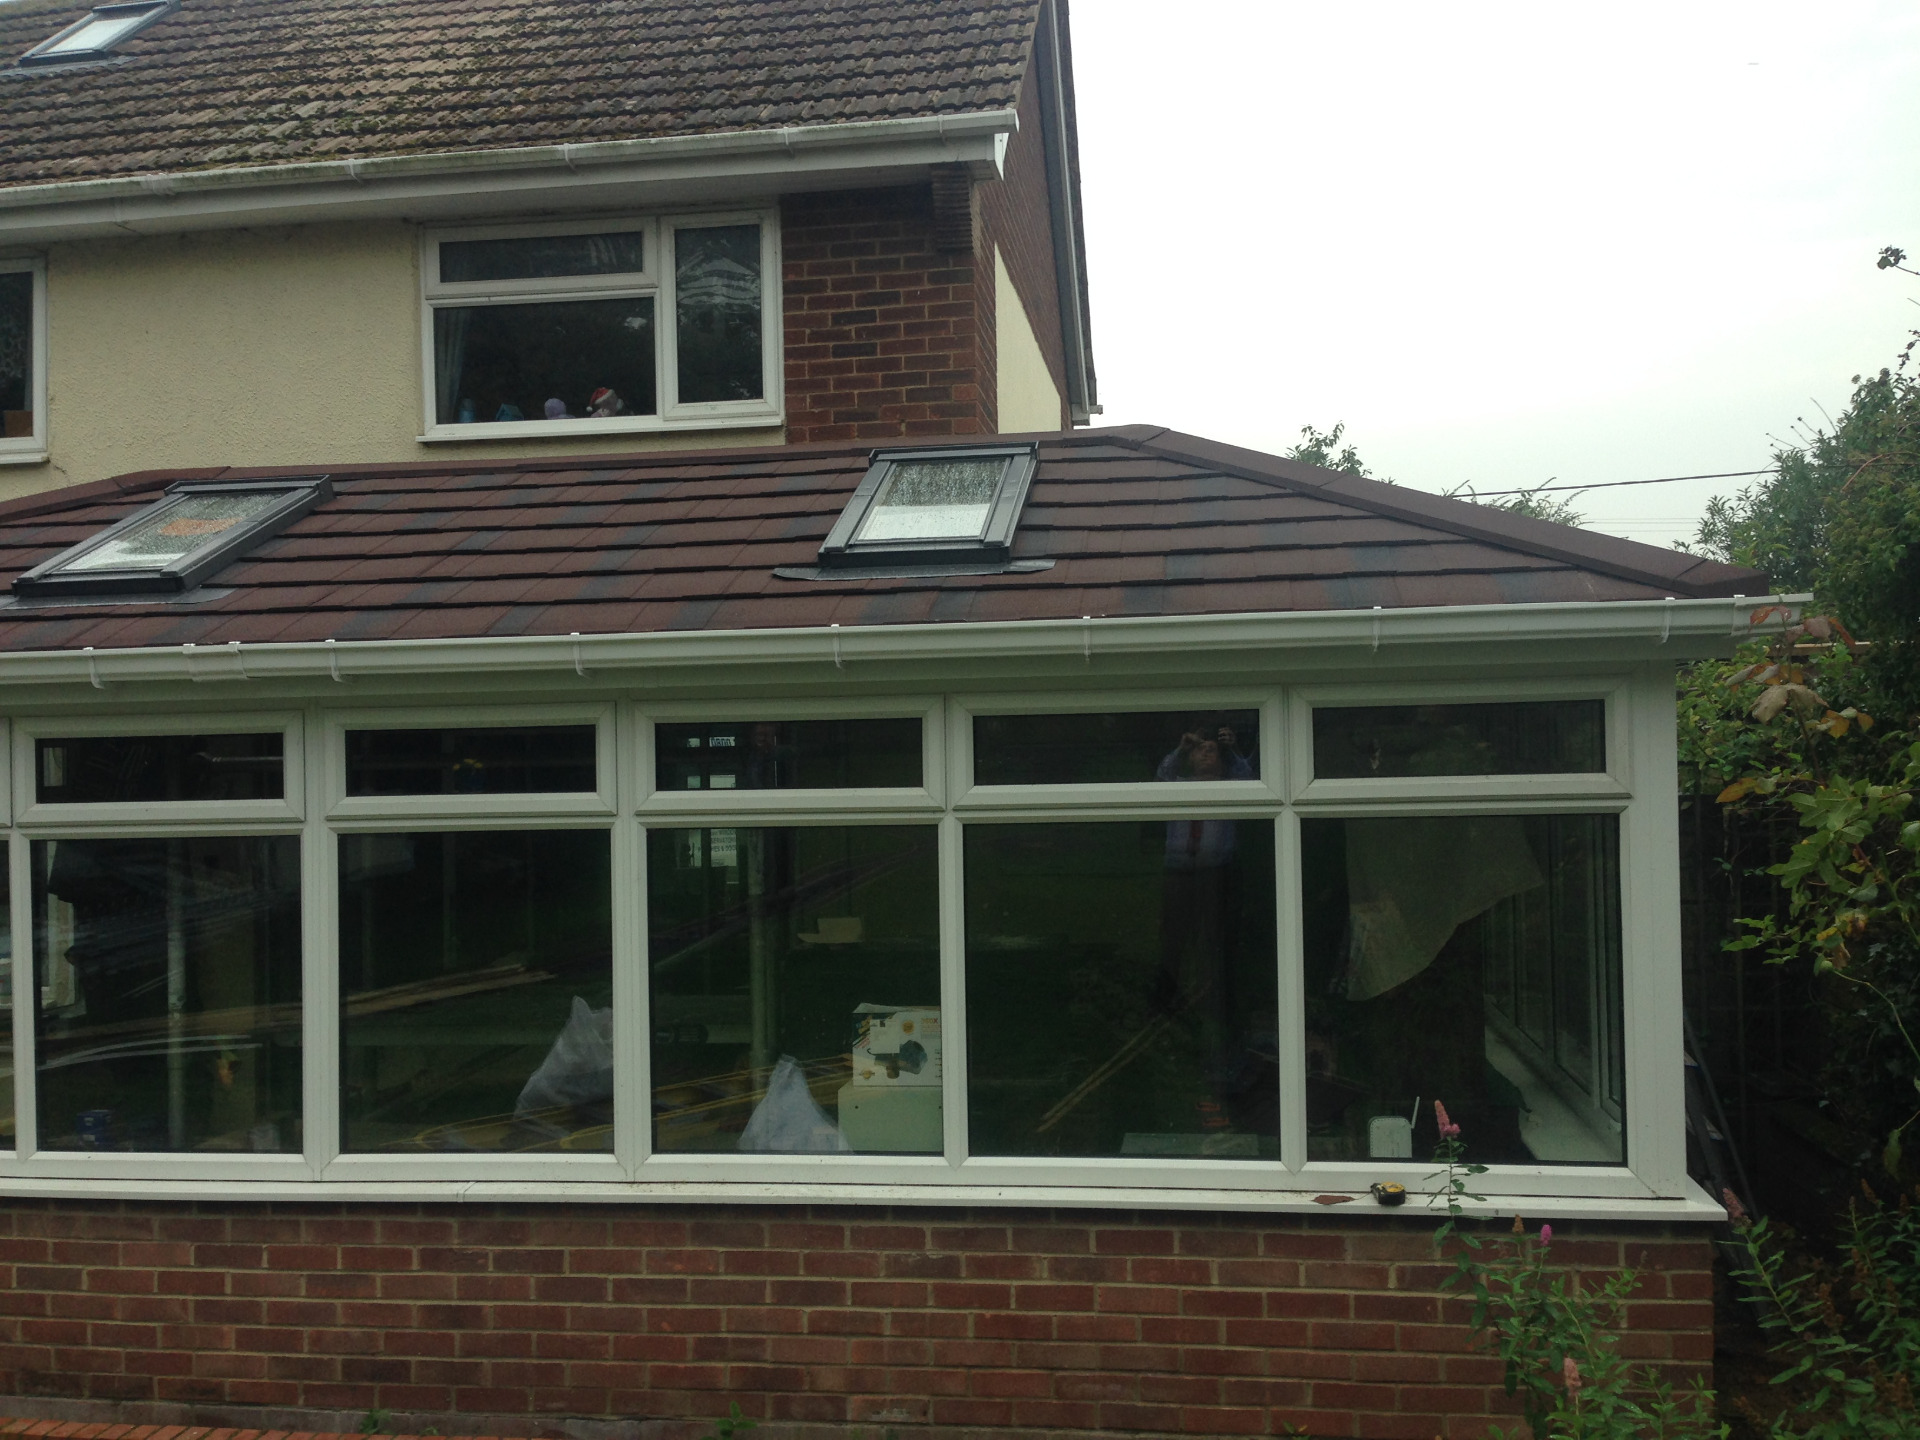 Equinox Tiled Roof System Installers Essex